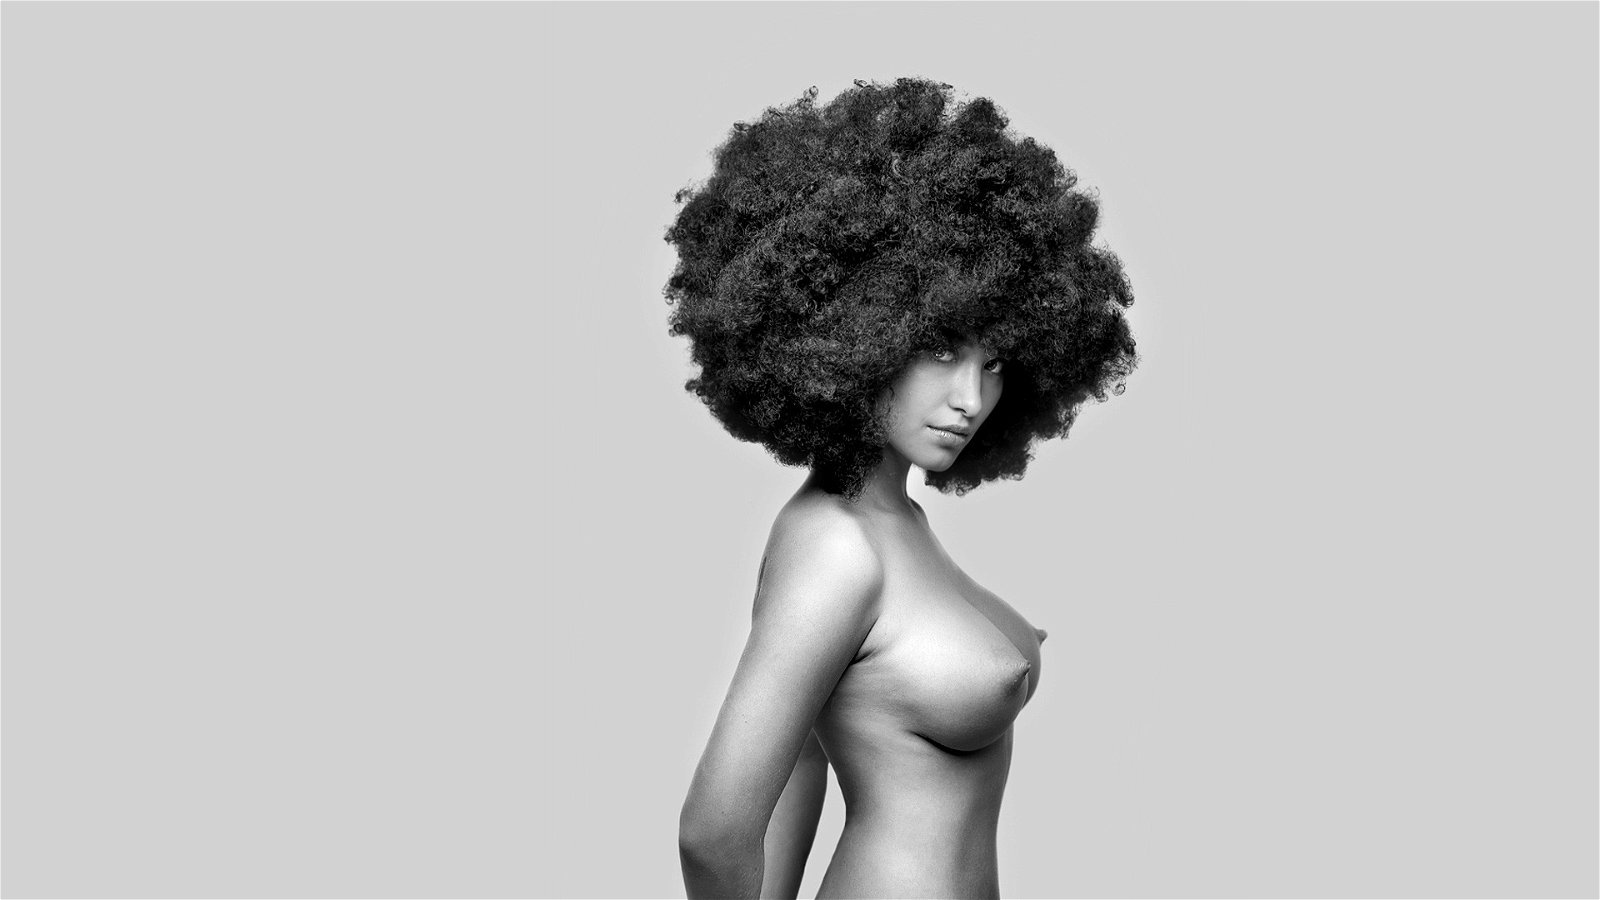 Photo by Dominance by Design with the username @DxD,  October 26, 2014 at 3:14 PM and the text says 'http://dominance-by-design.tumblr.com/ #girl  #black  #afro  #wallpaper  #source  #dxd  #bw'